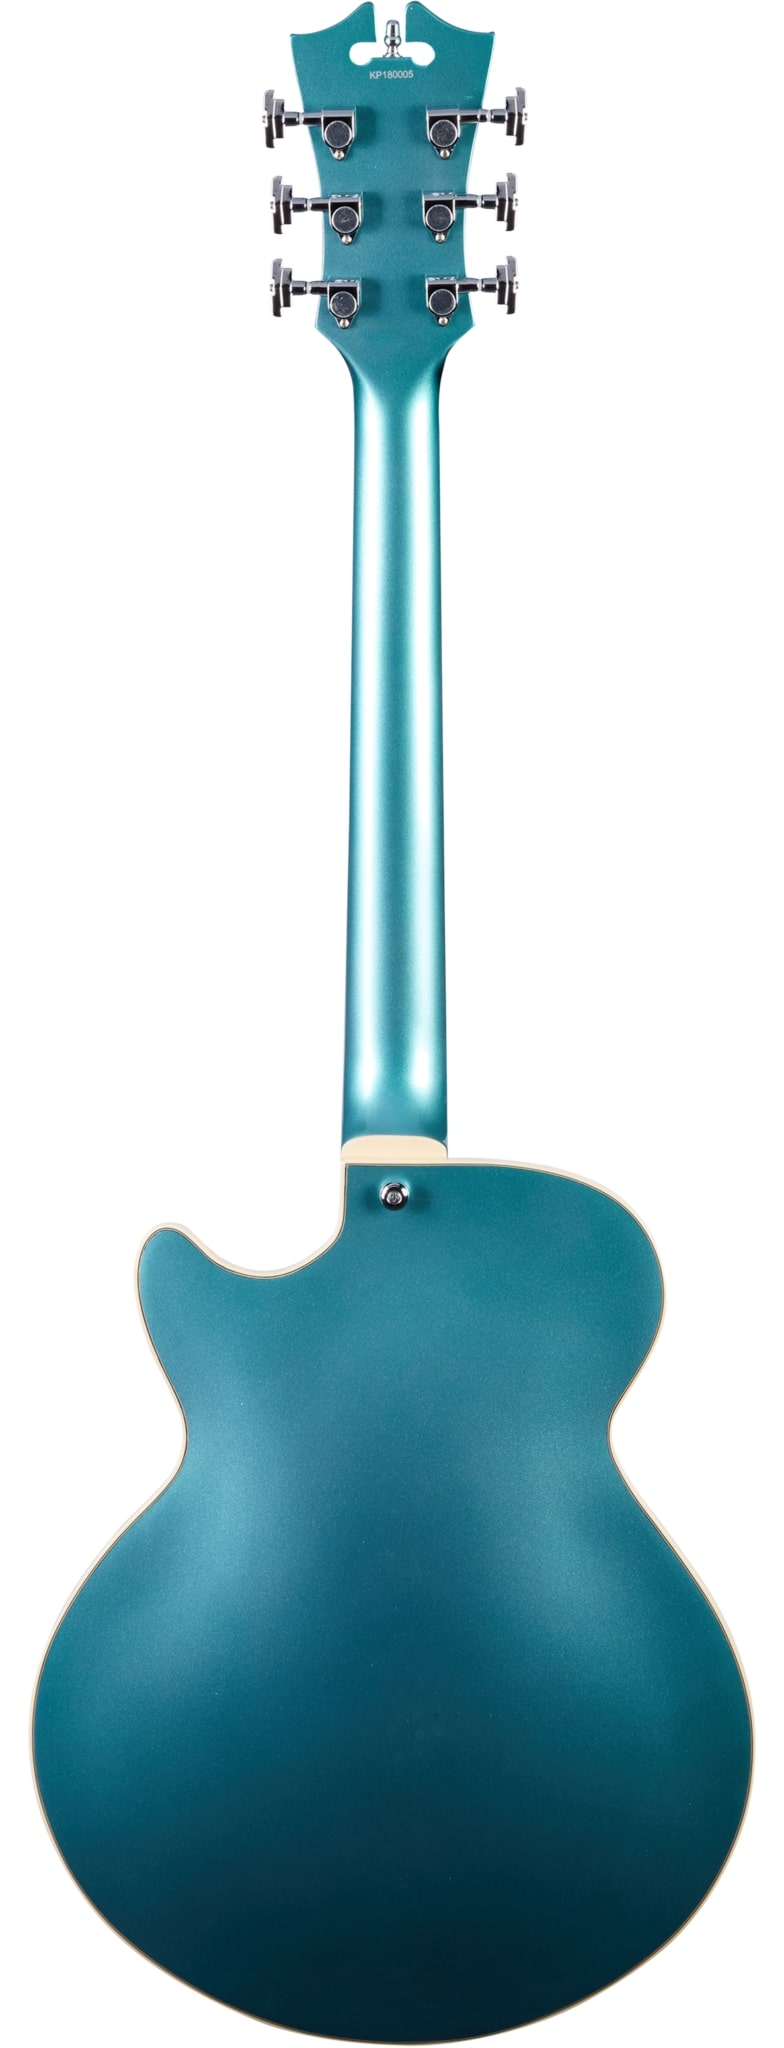 D'Angelico Premier SS Semi-hollow Electric Guitar With Stopbar Tailpiece, Ocean Turquoise DAPSSOTCSCB